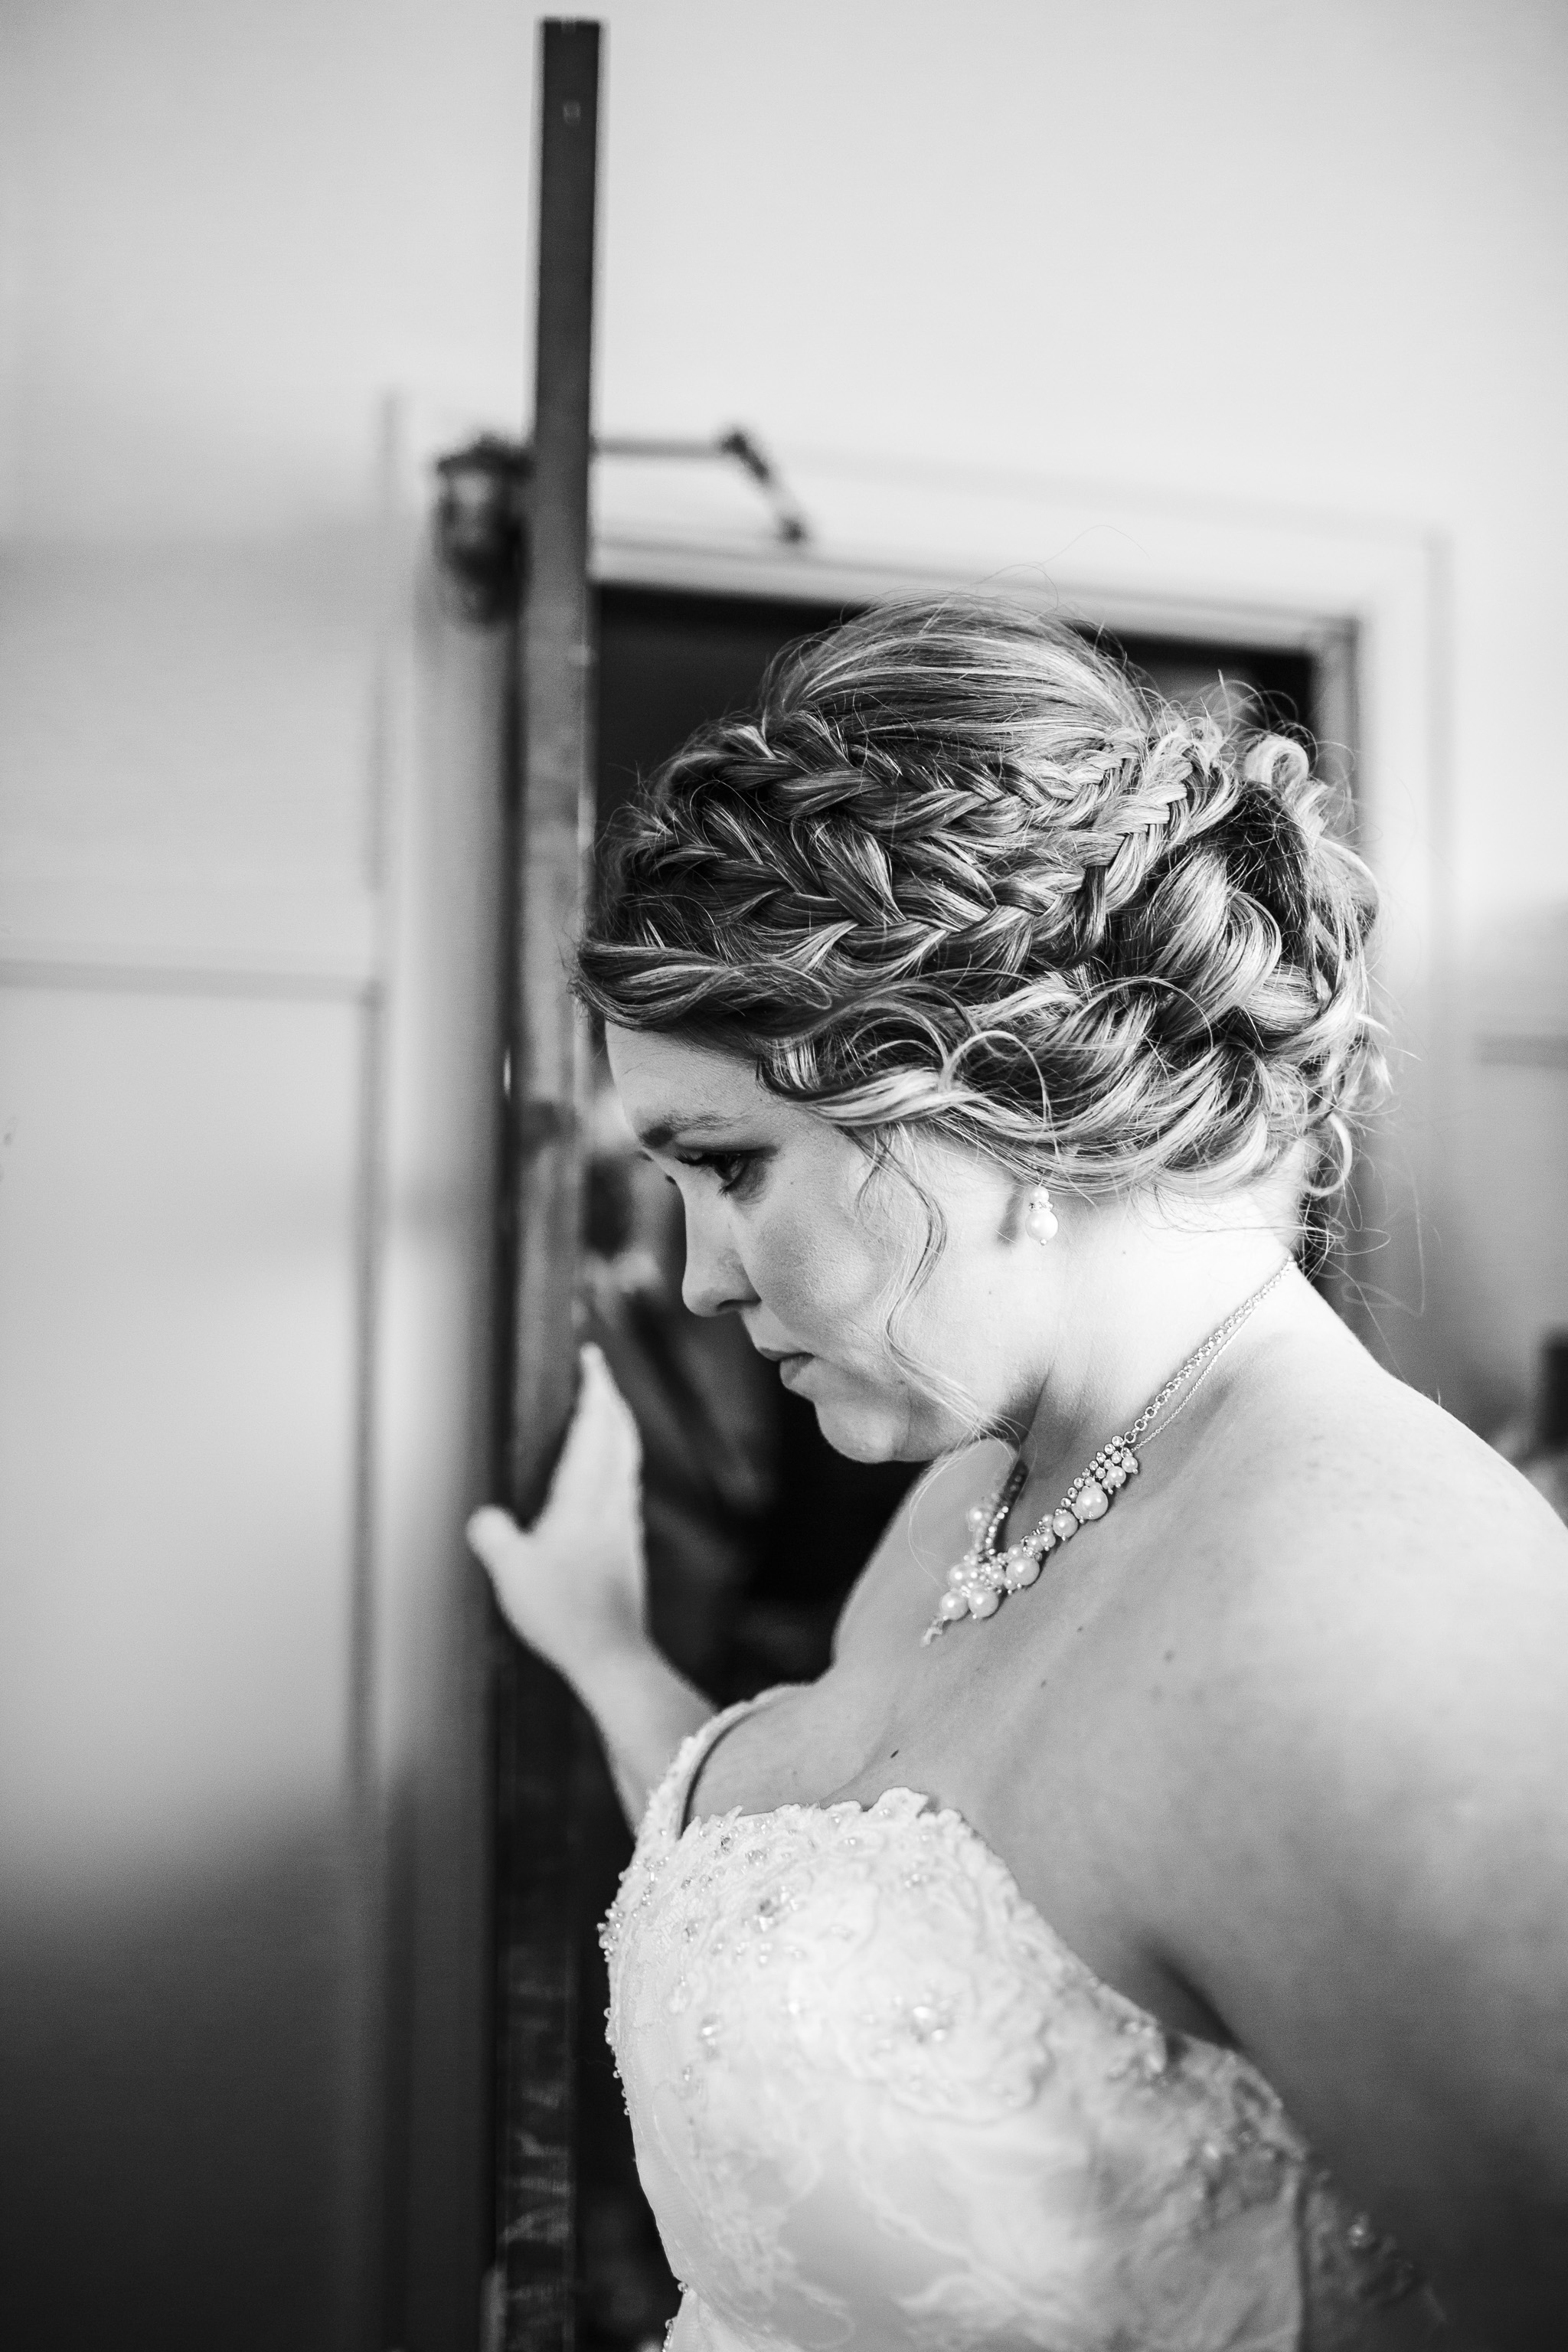 Zibell Spring Wedding, Bride and Groom, Powerful, Connected, Exploration, Laura Duggleby Photography -110.JPG